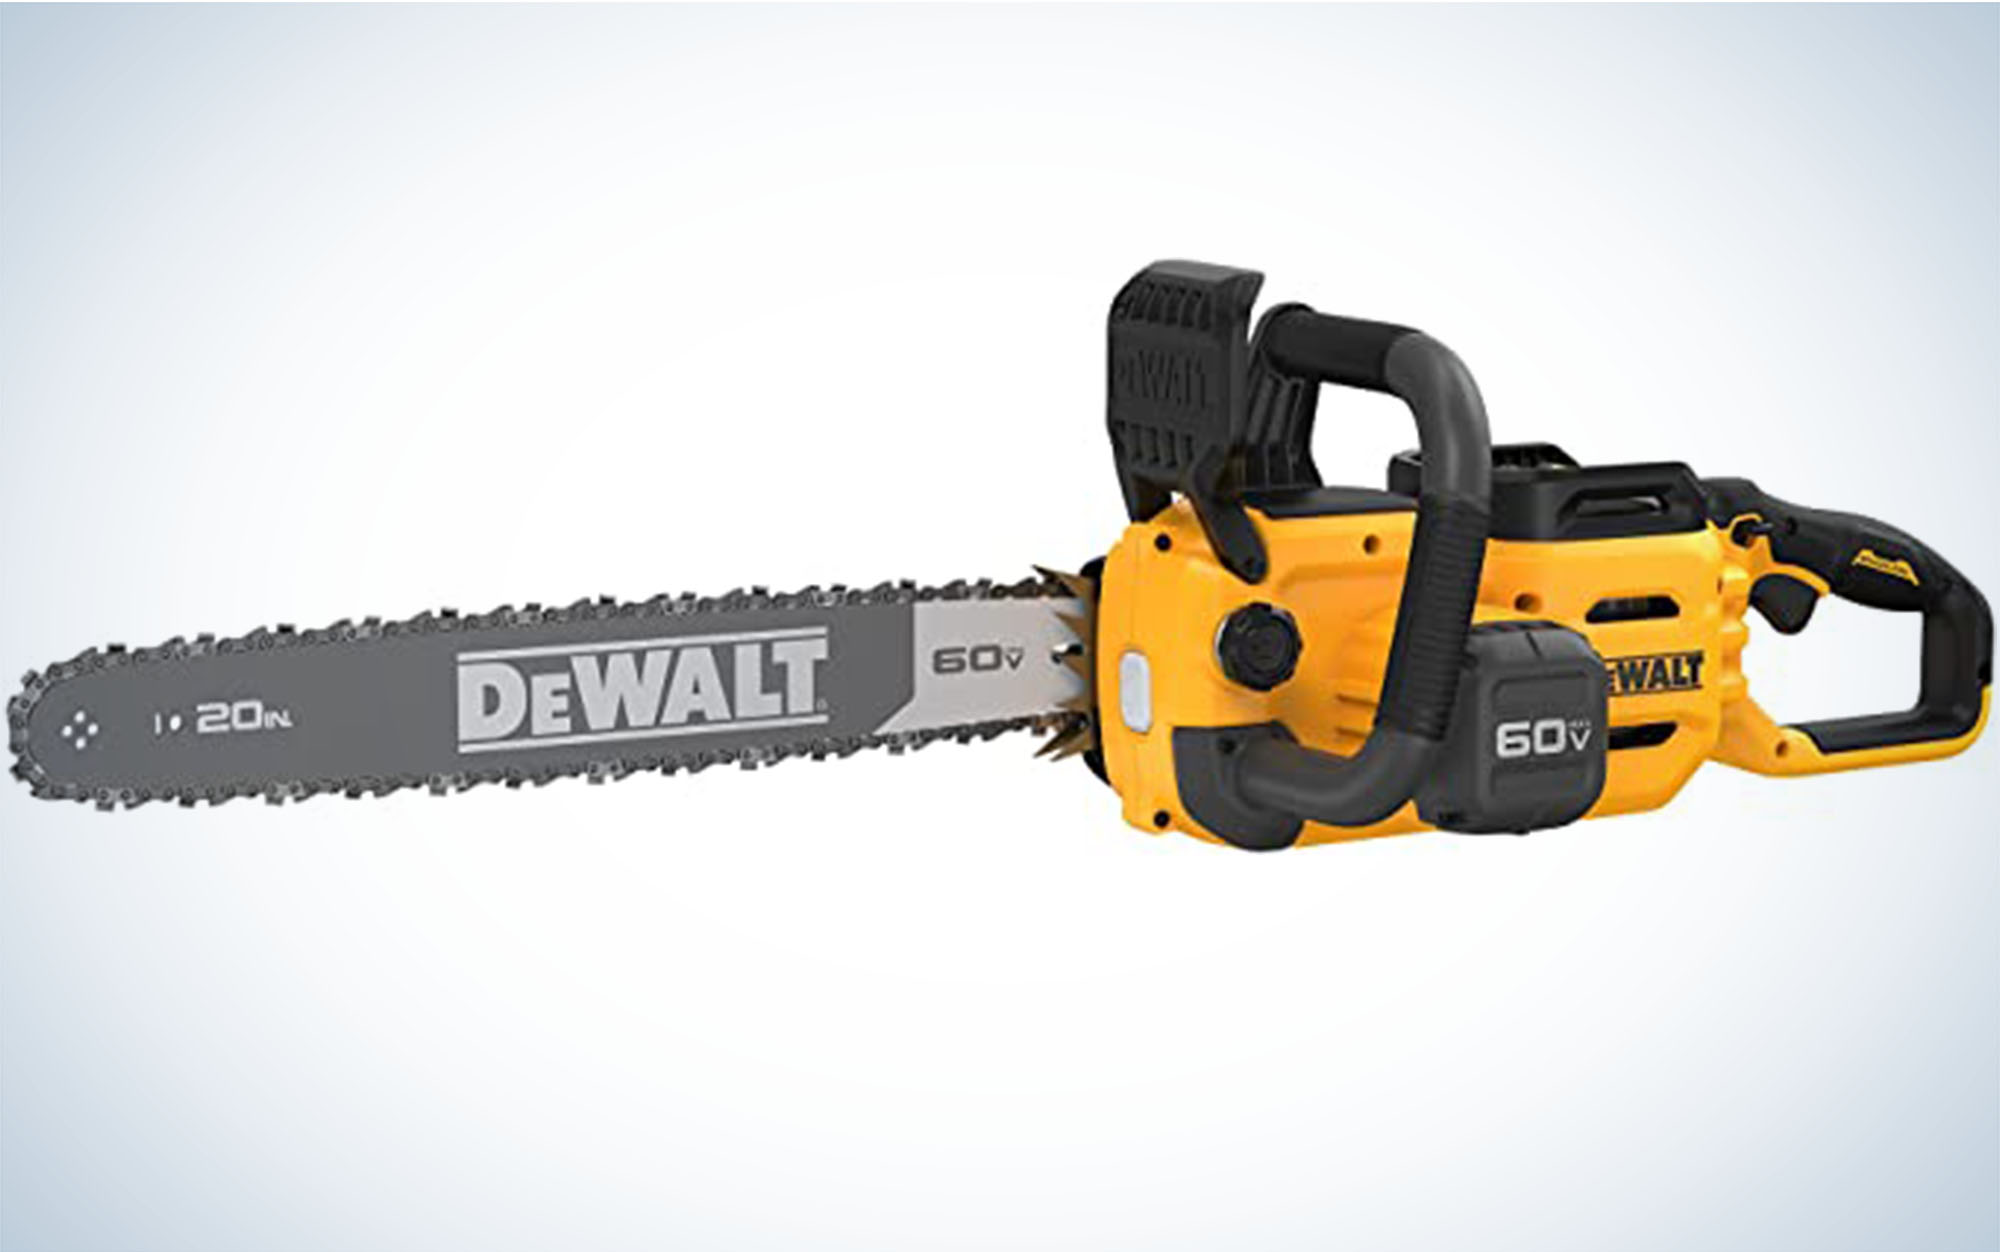 The DeWalt 60V Max is one of the best chainsaws.